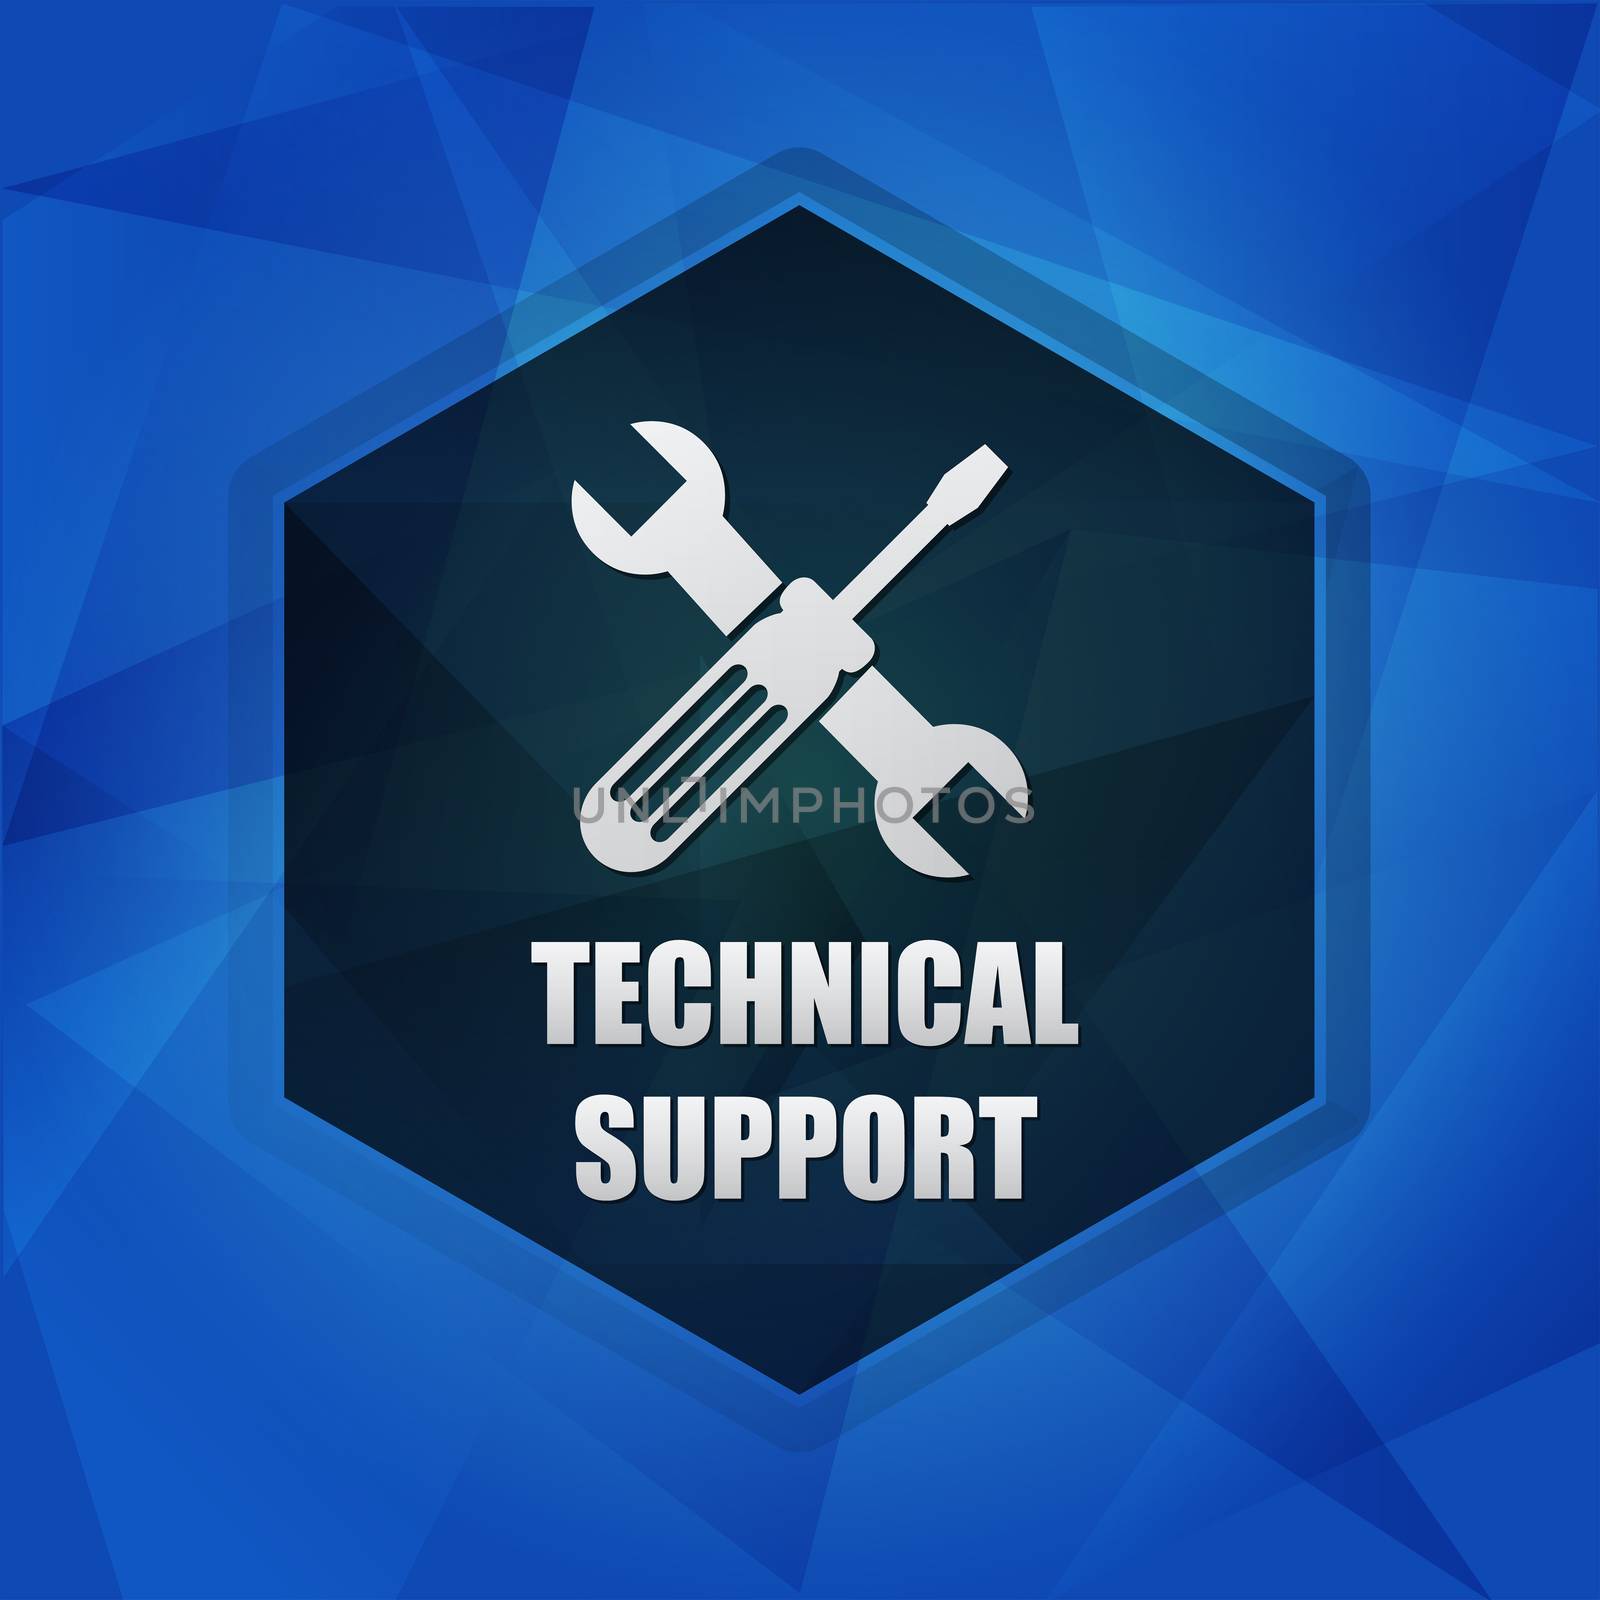 technical support with tools sign over dark blue background, fla by marinini